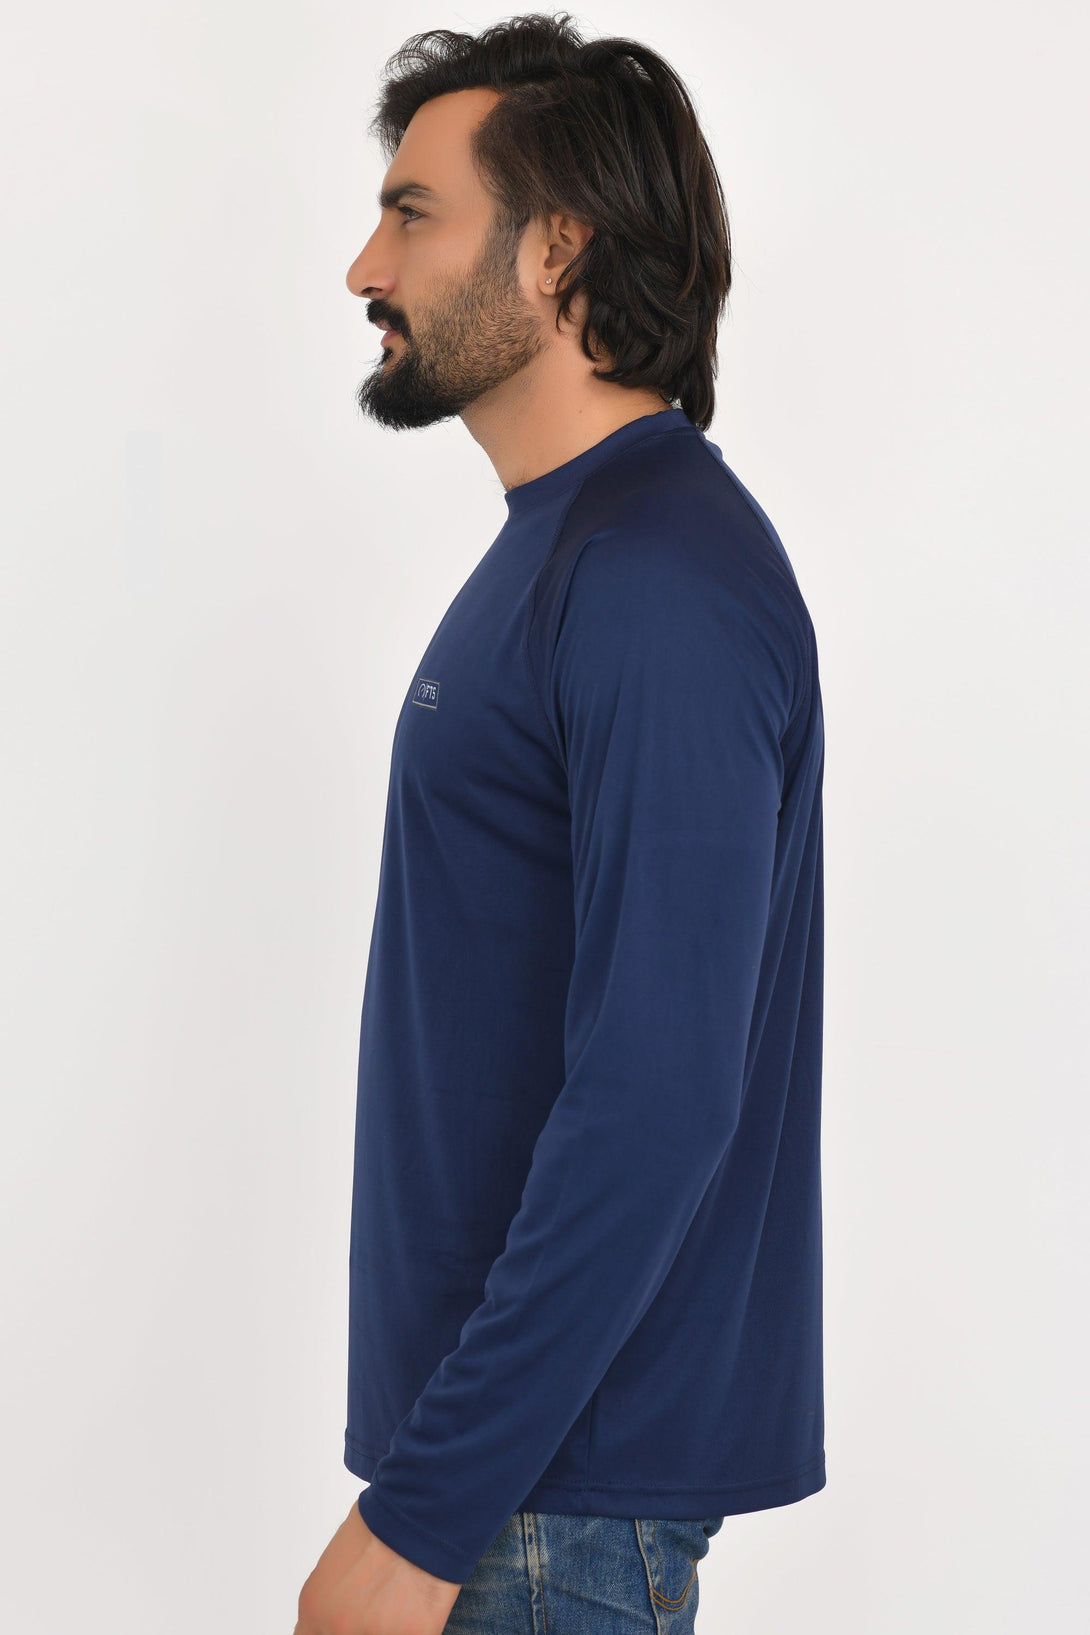 Polyester Full sleeve T-Shirts | RED - NAVY - Pack of 2 - FTS